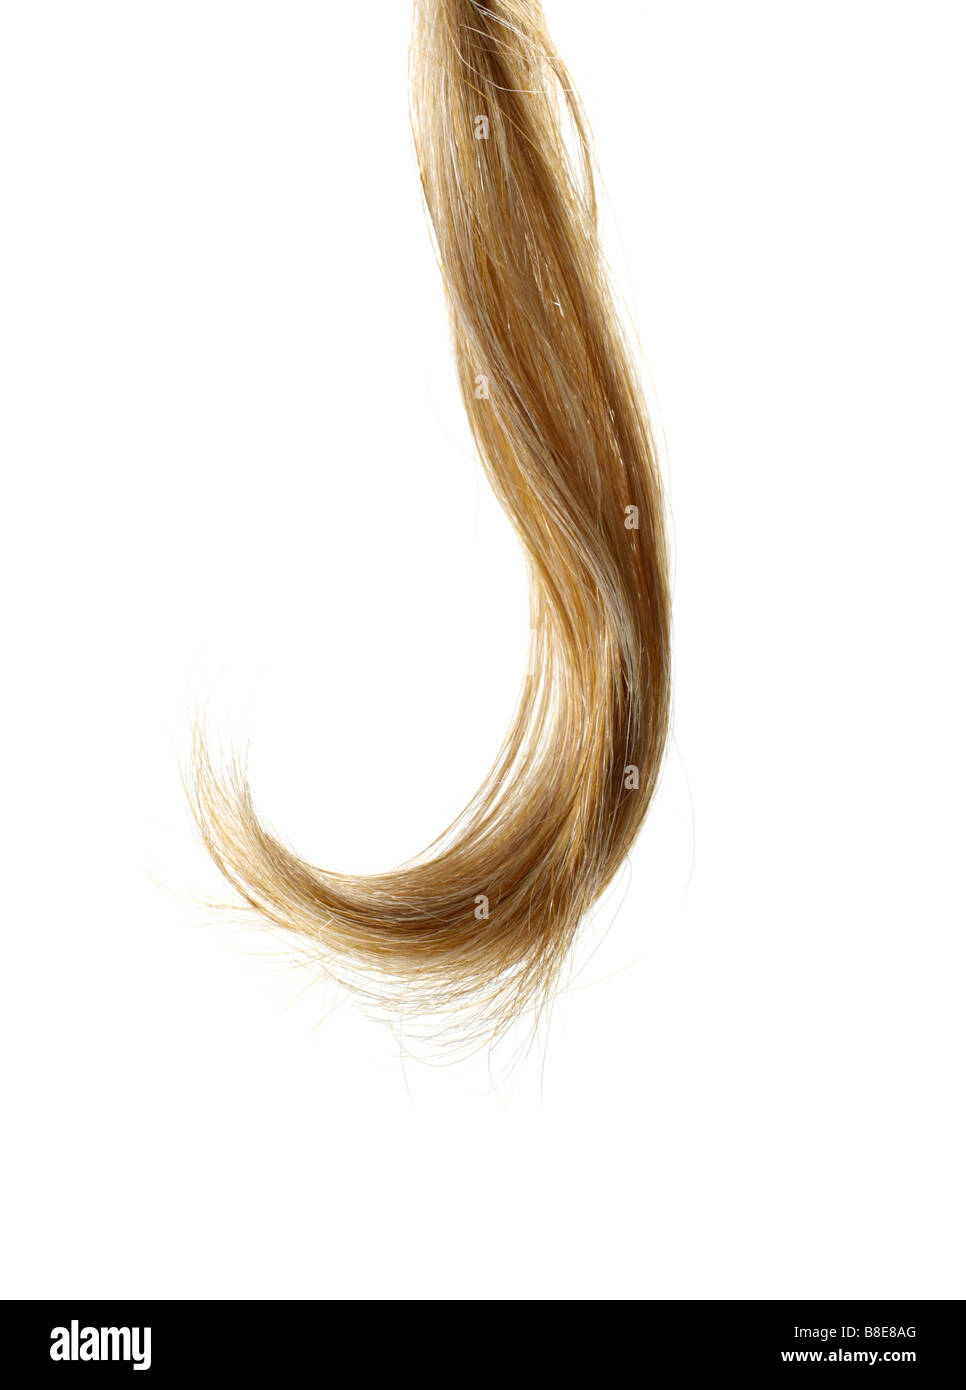 Curl of blond human Hair Stock Photo